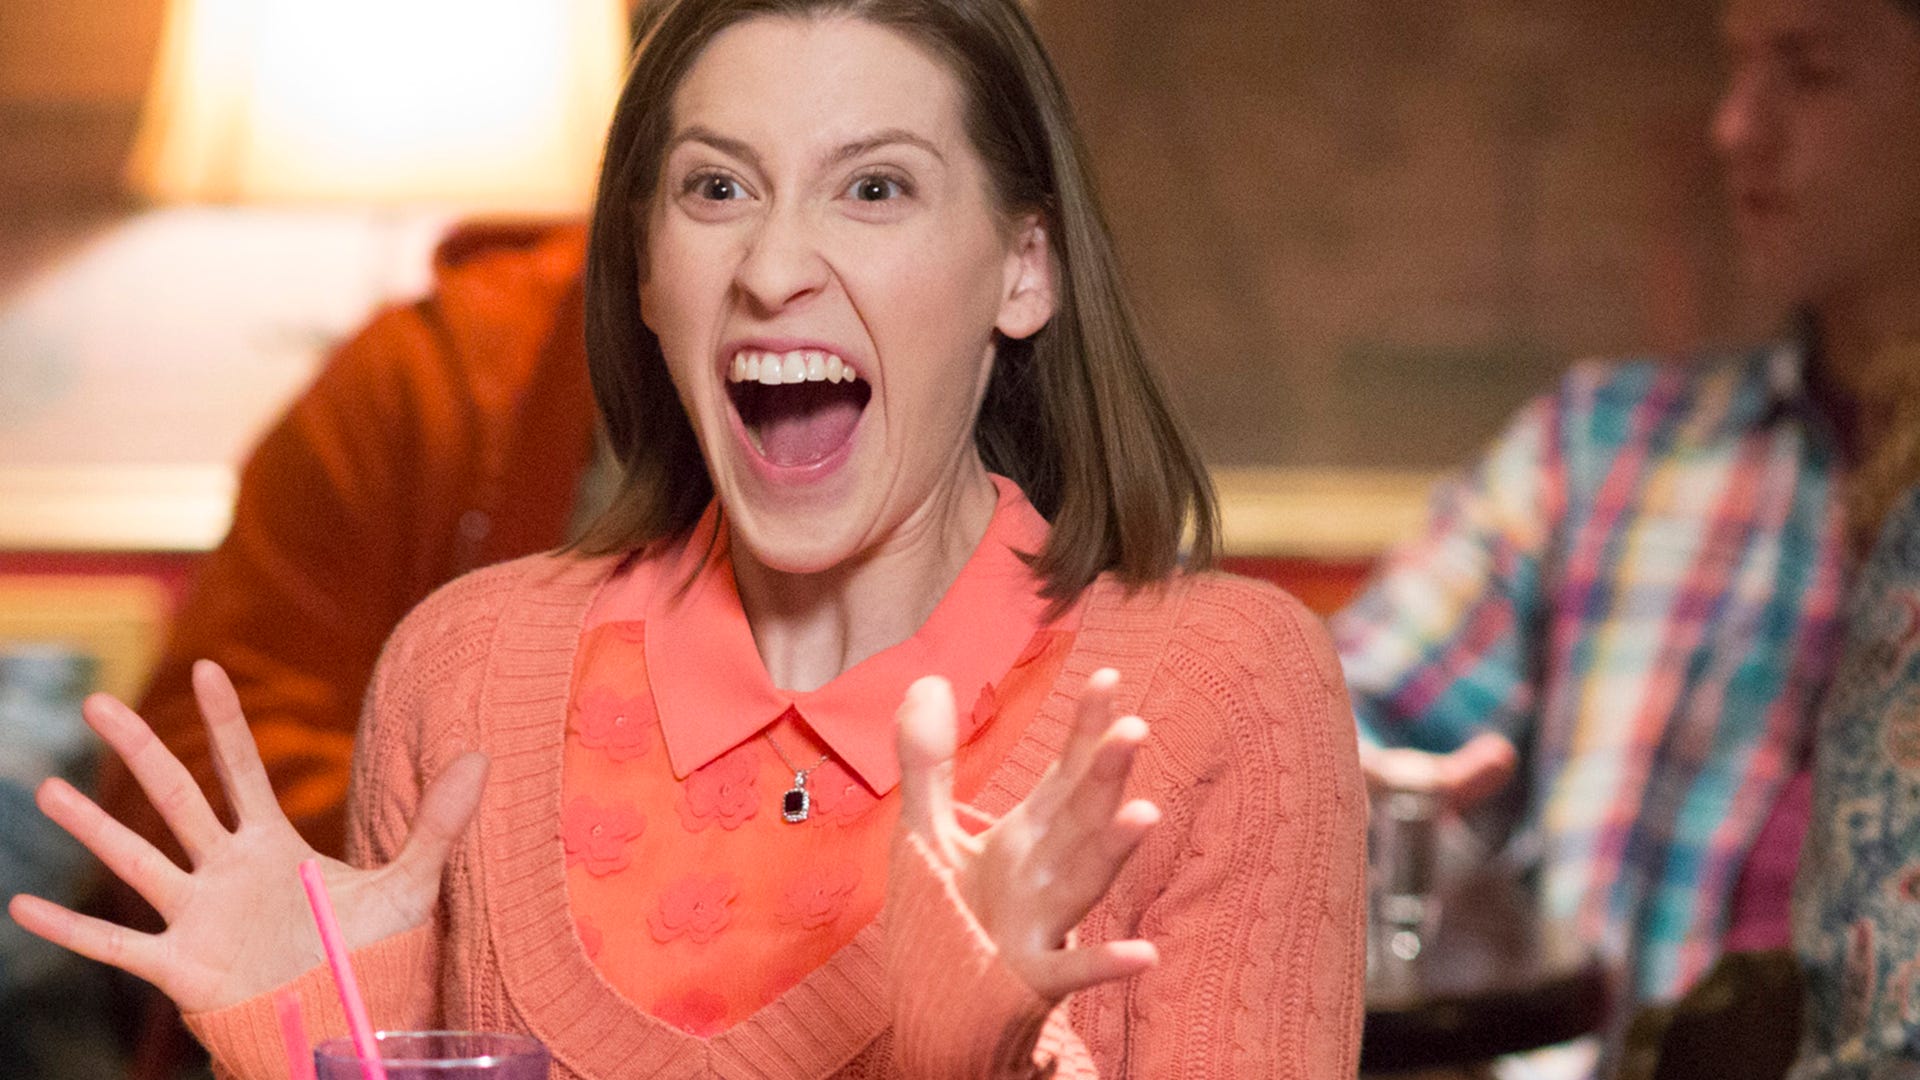 Eden Sher, The Middle